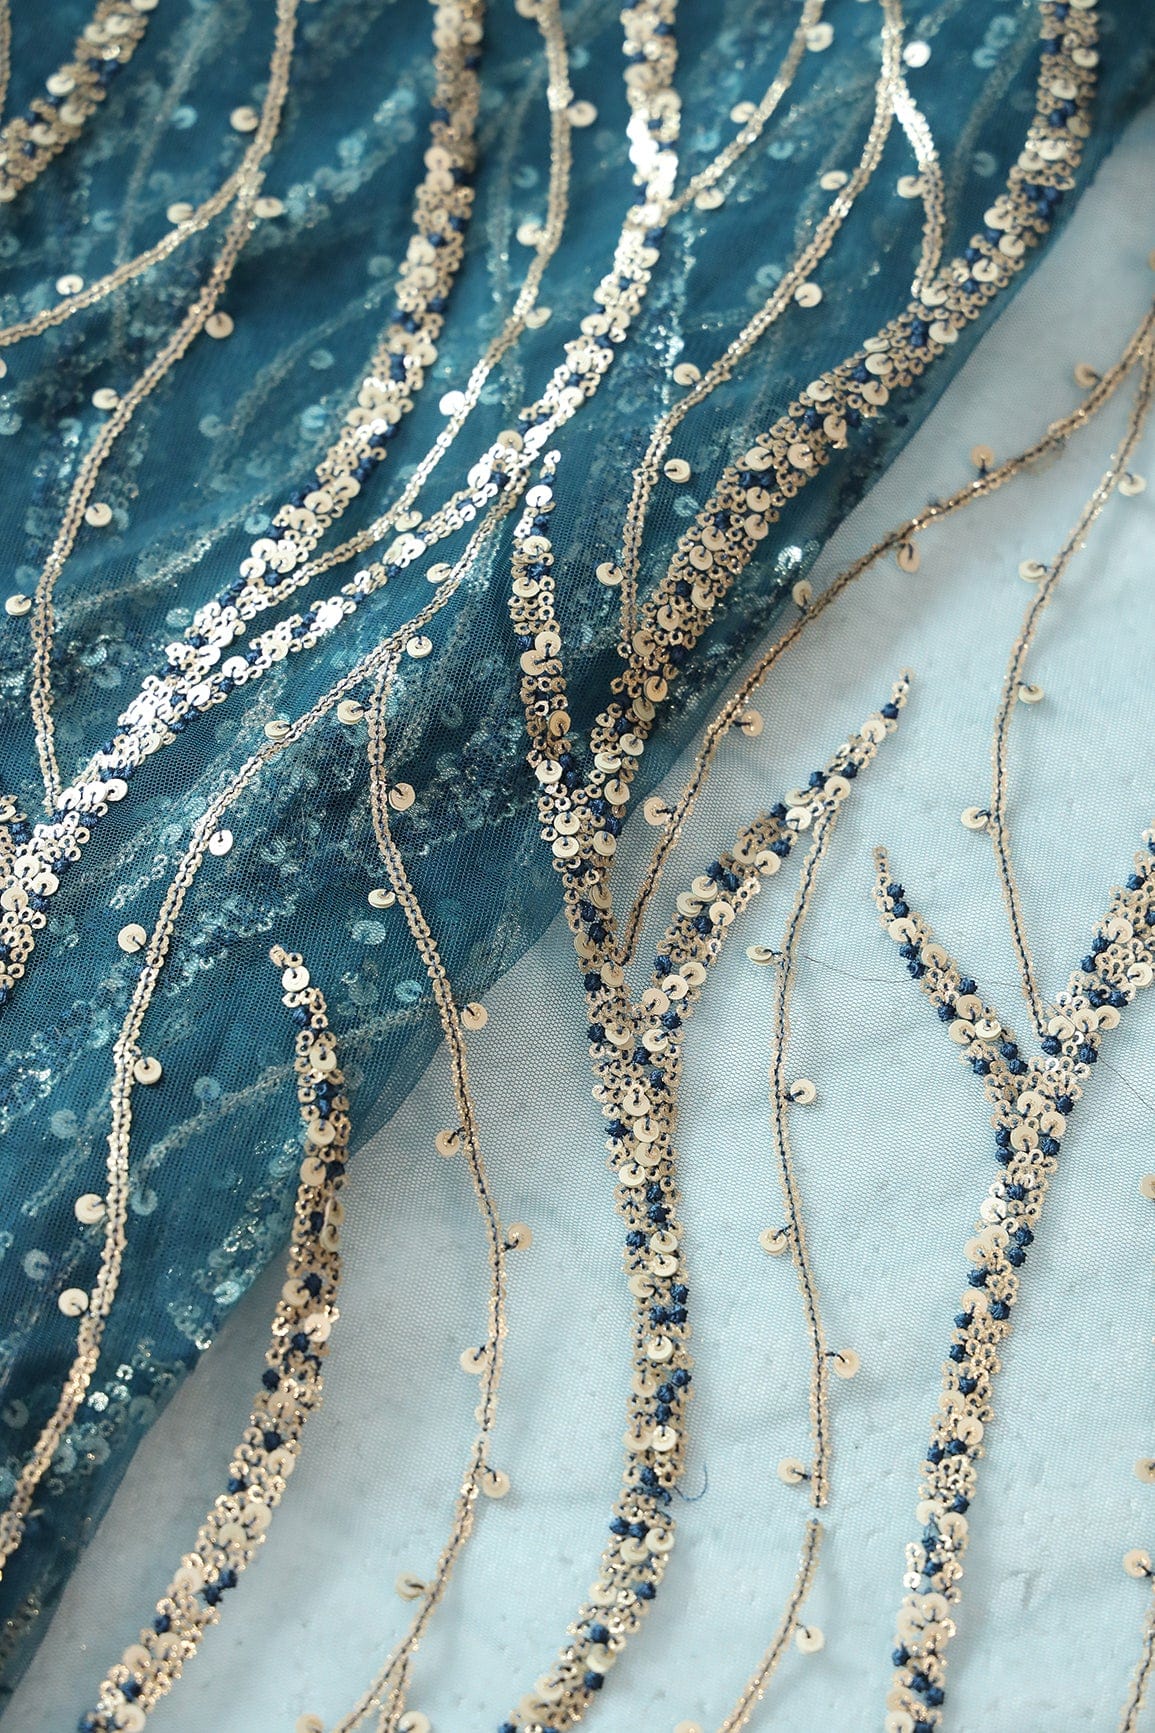 doeraa Embroidery Fabrics Gold And Silver Sequins With Blue Thread Wavy Embroidery Work On Rama Blue Soft Net Fabric